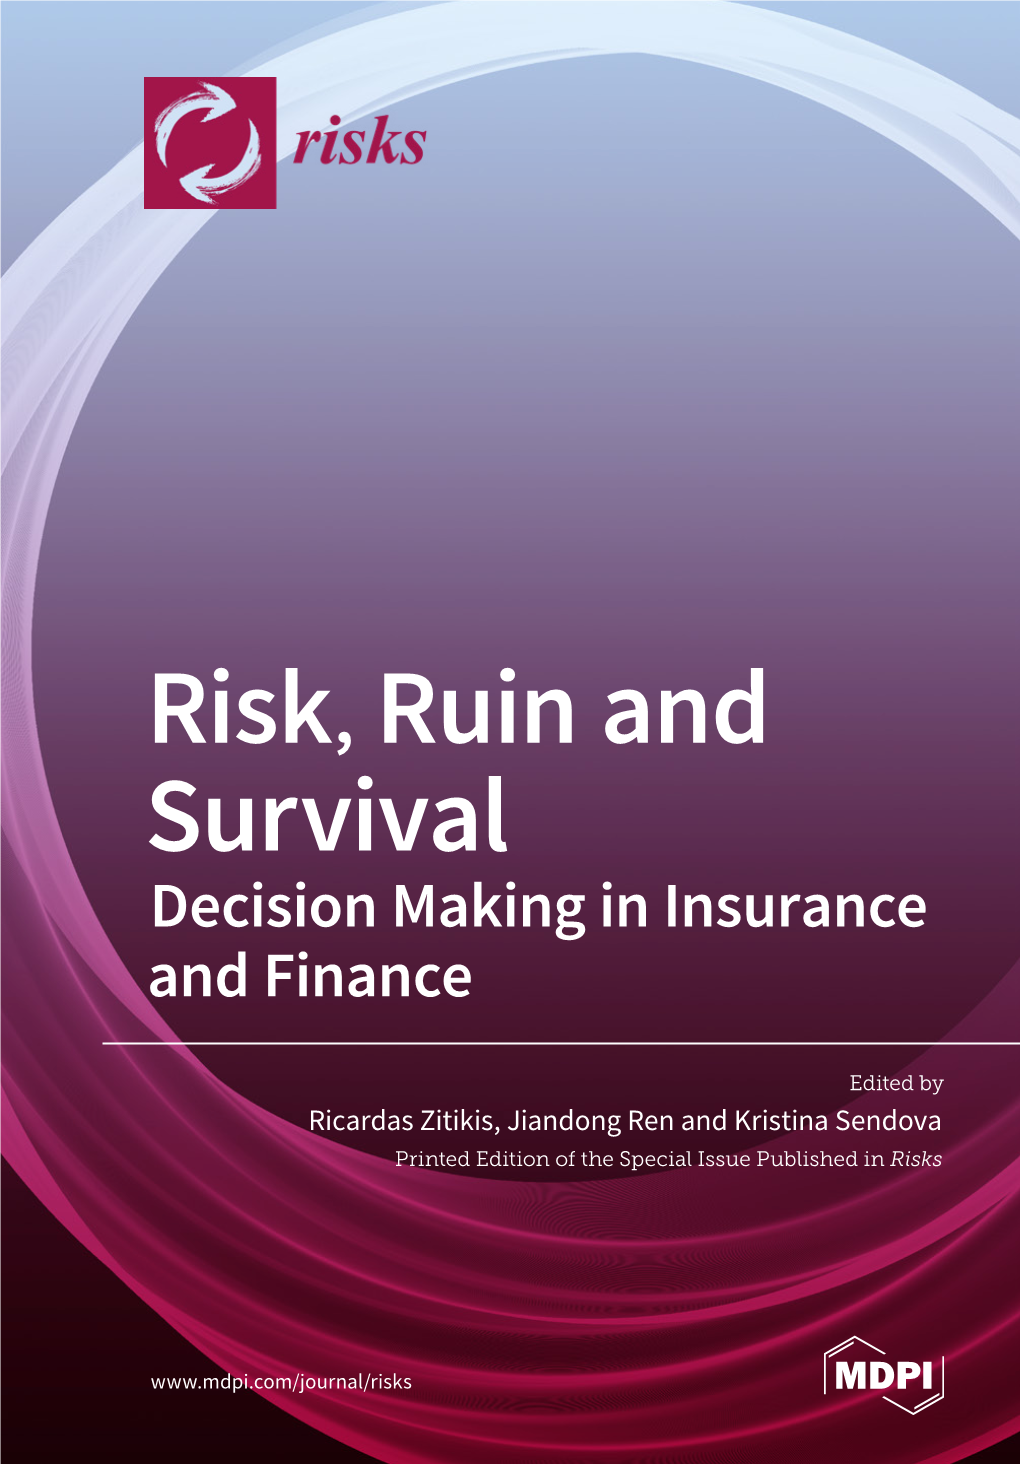 Risk, Ruin and Survival Decision Making in Insurance and Finance